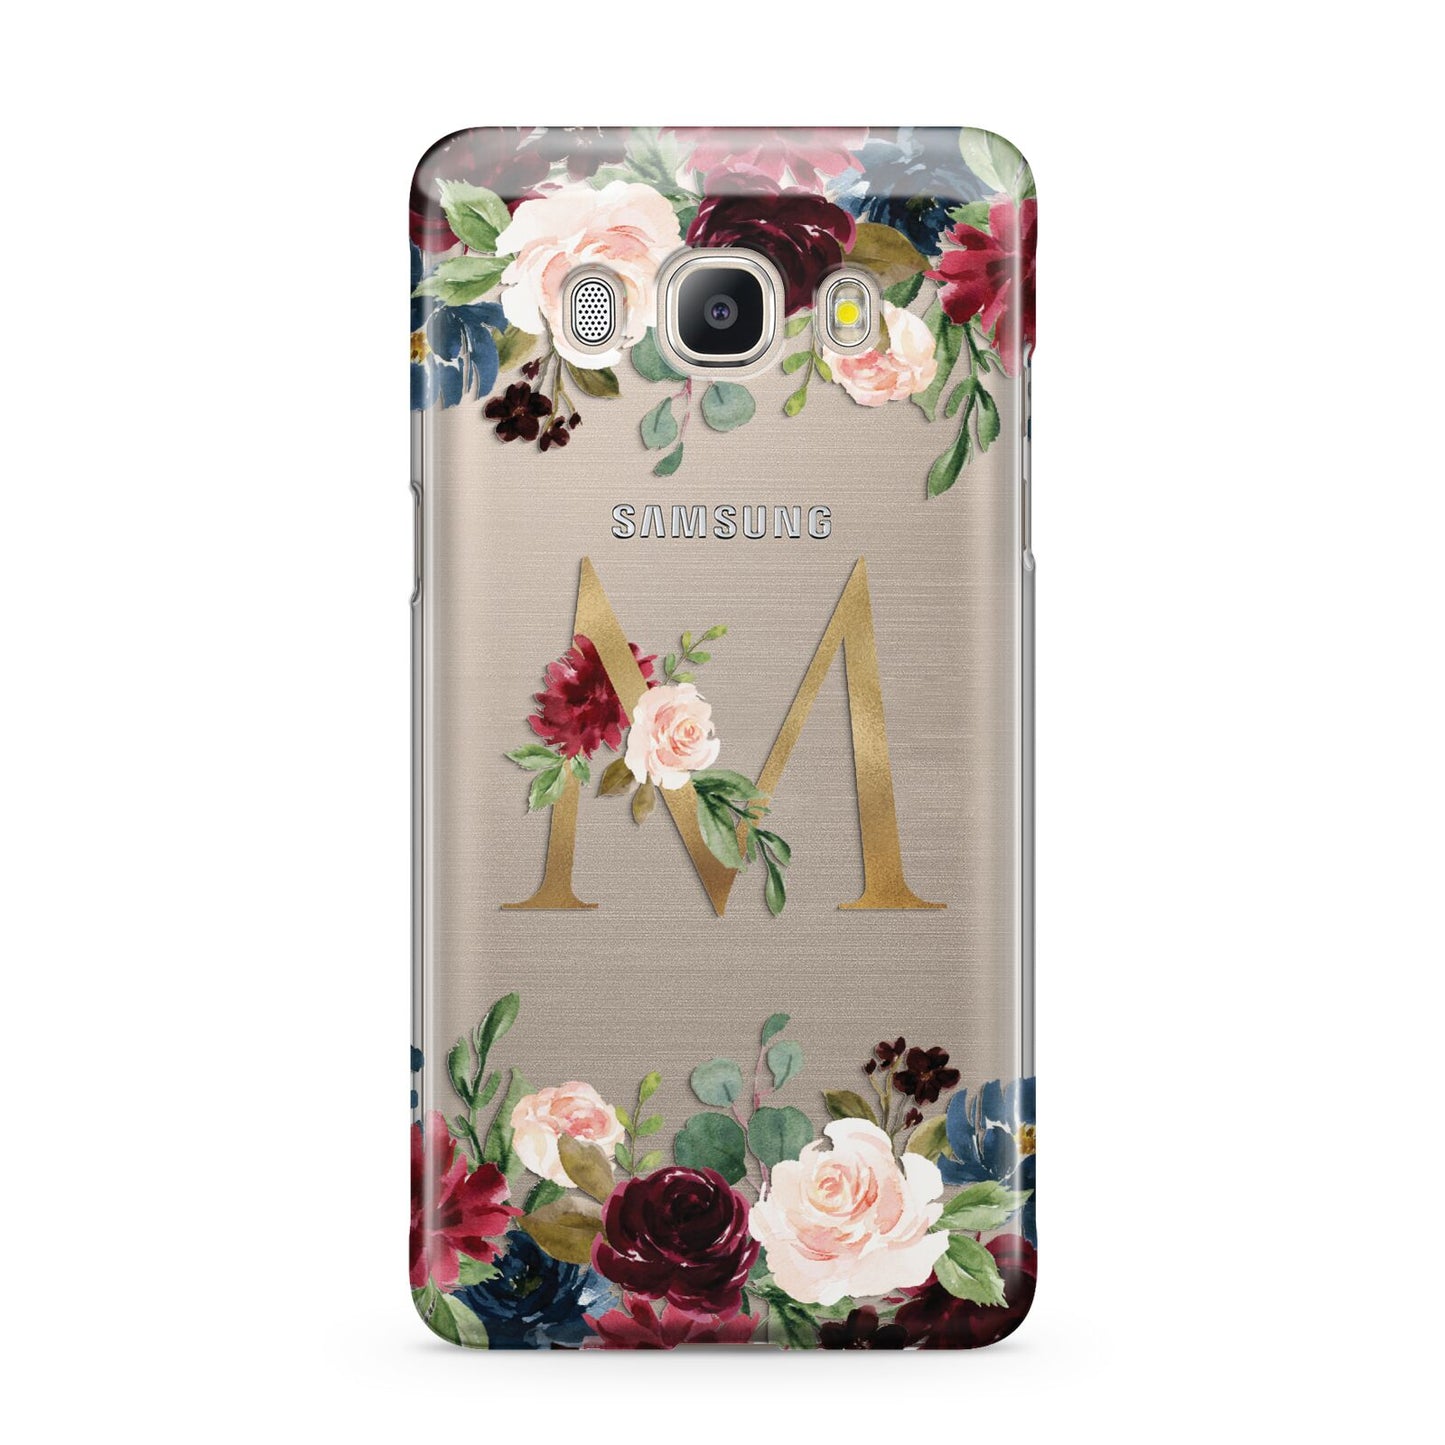 Personalised Clear Monogram Floral Samsung Galaxy J5 2016 Case